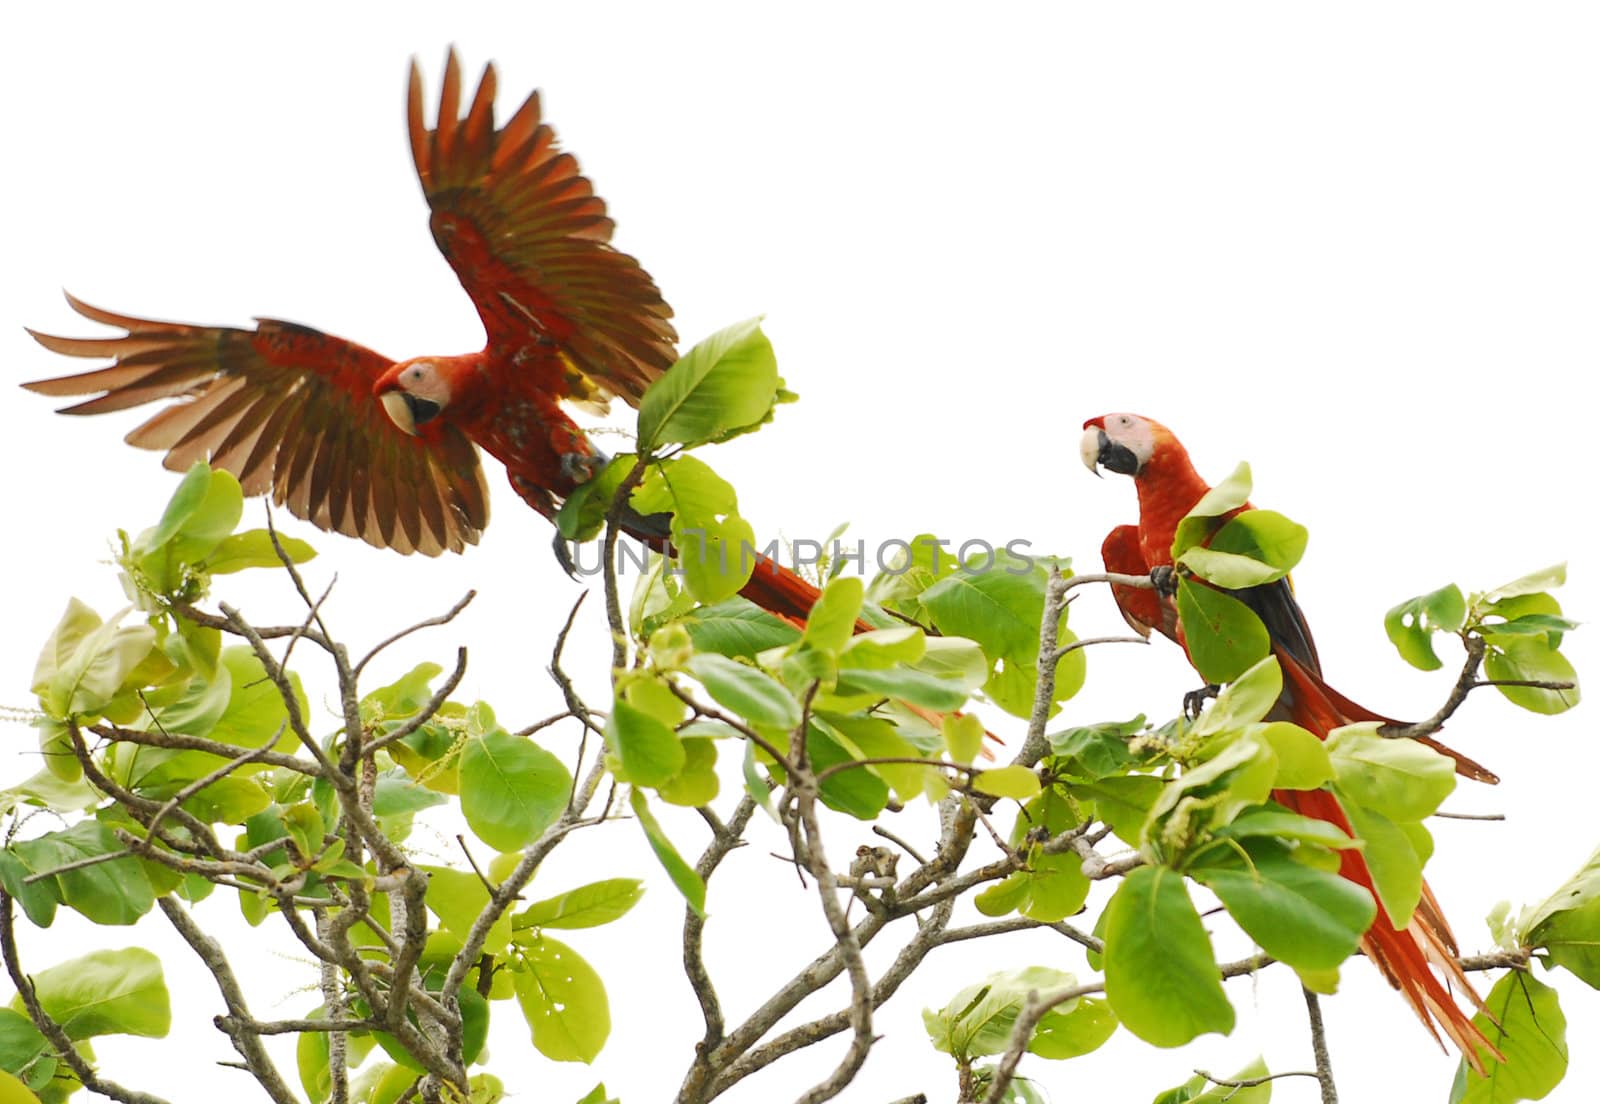 Parrots flying away from tree in Costa Rica